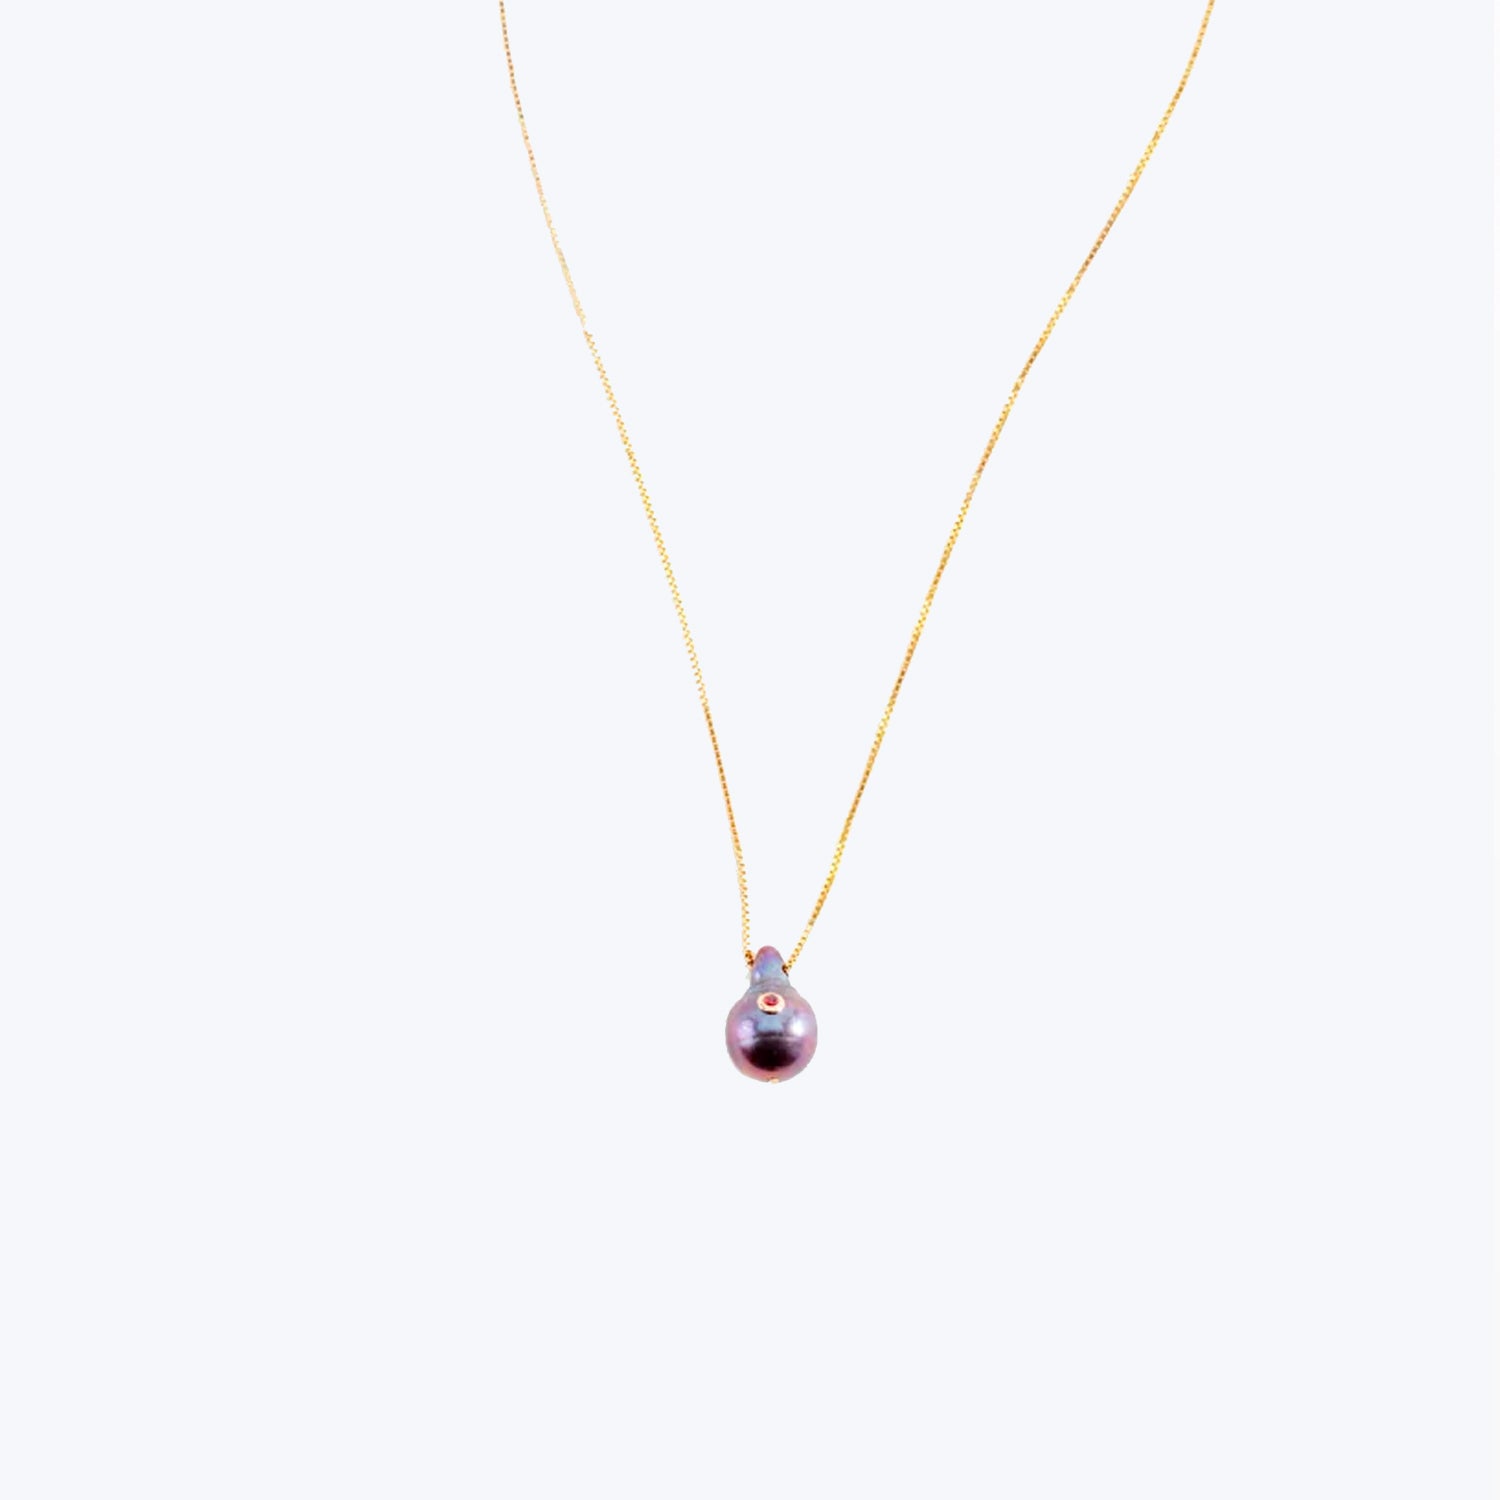 Exquisite gold necklace with iridescent purple pearl pendant shines elegantly.